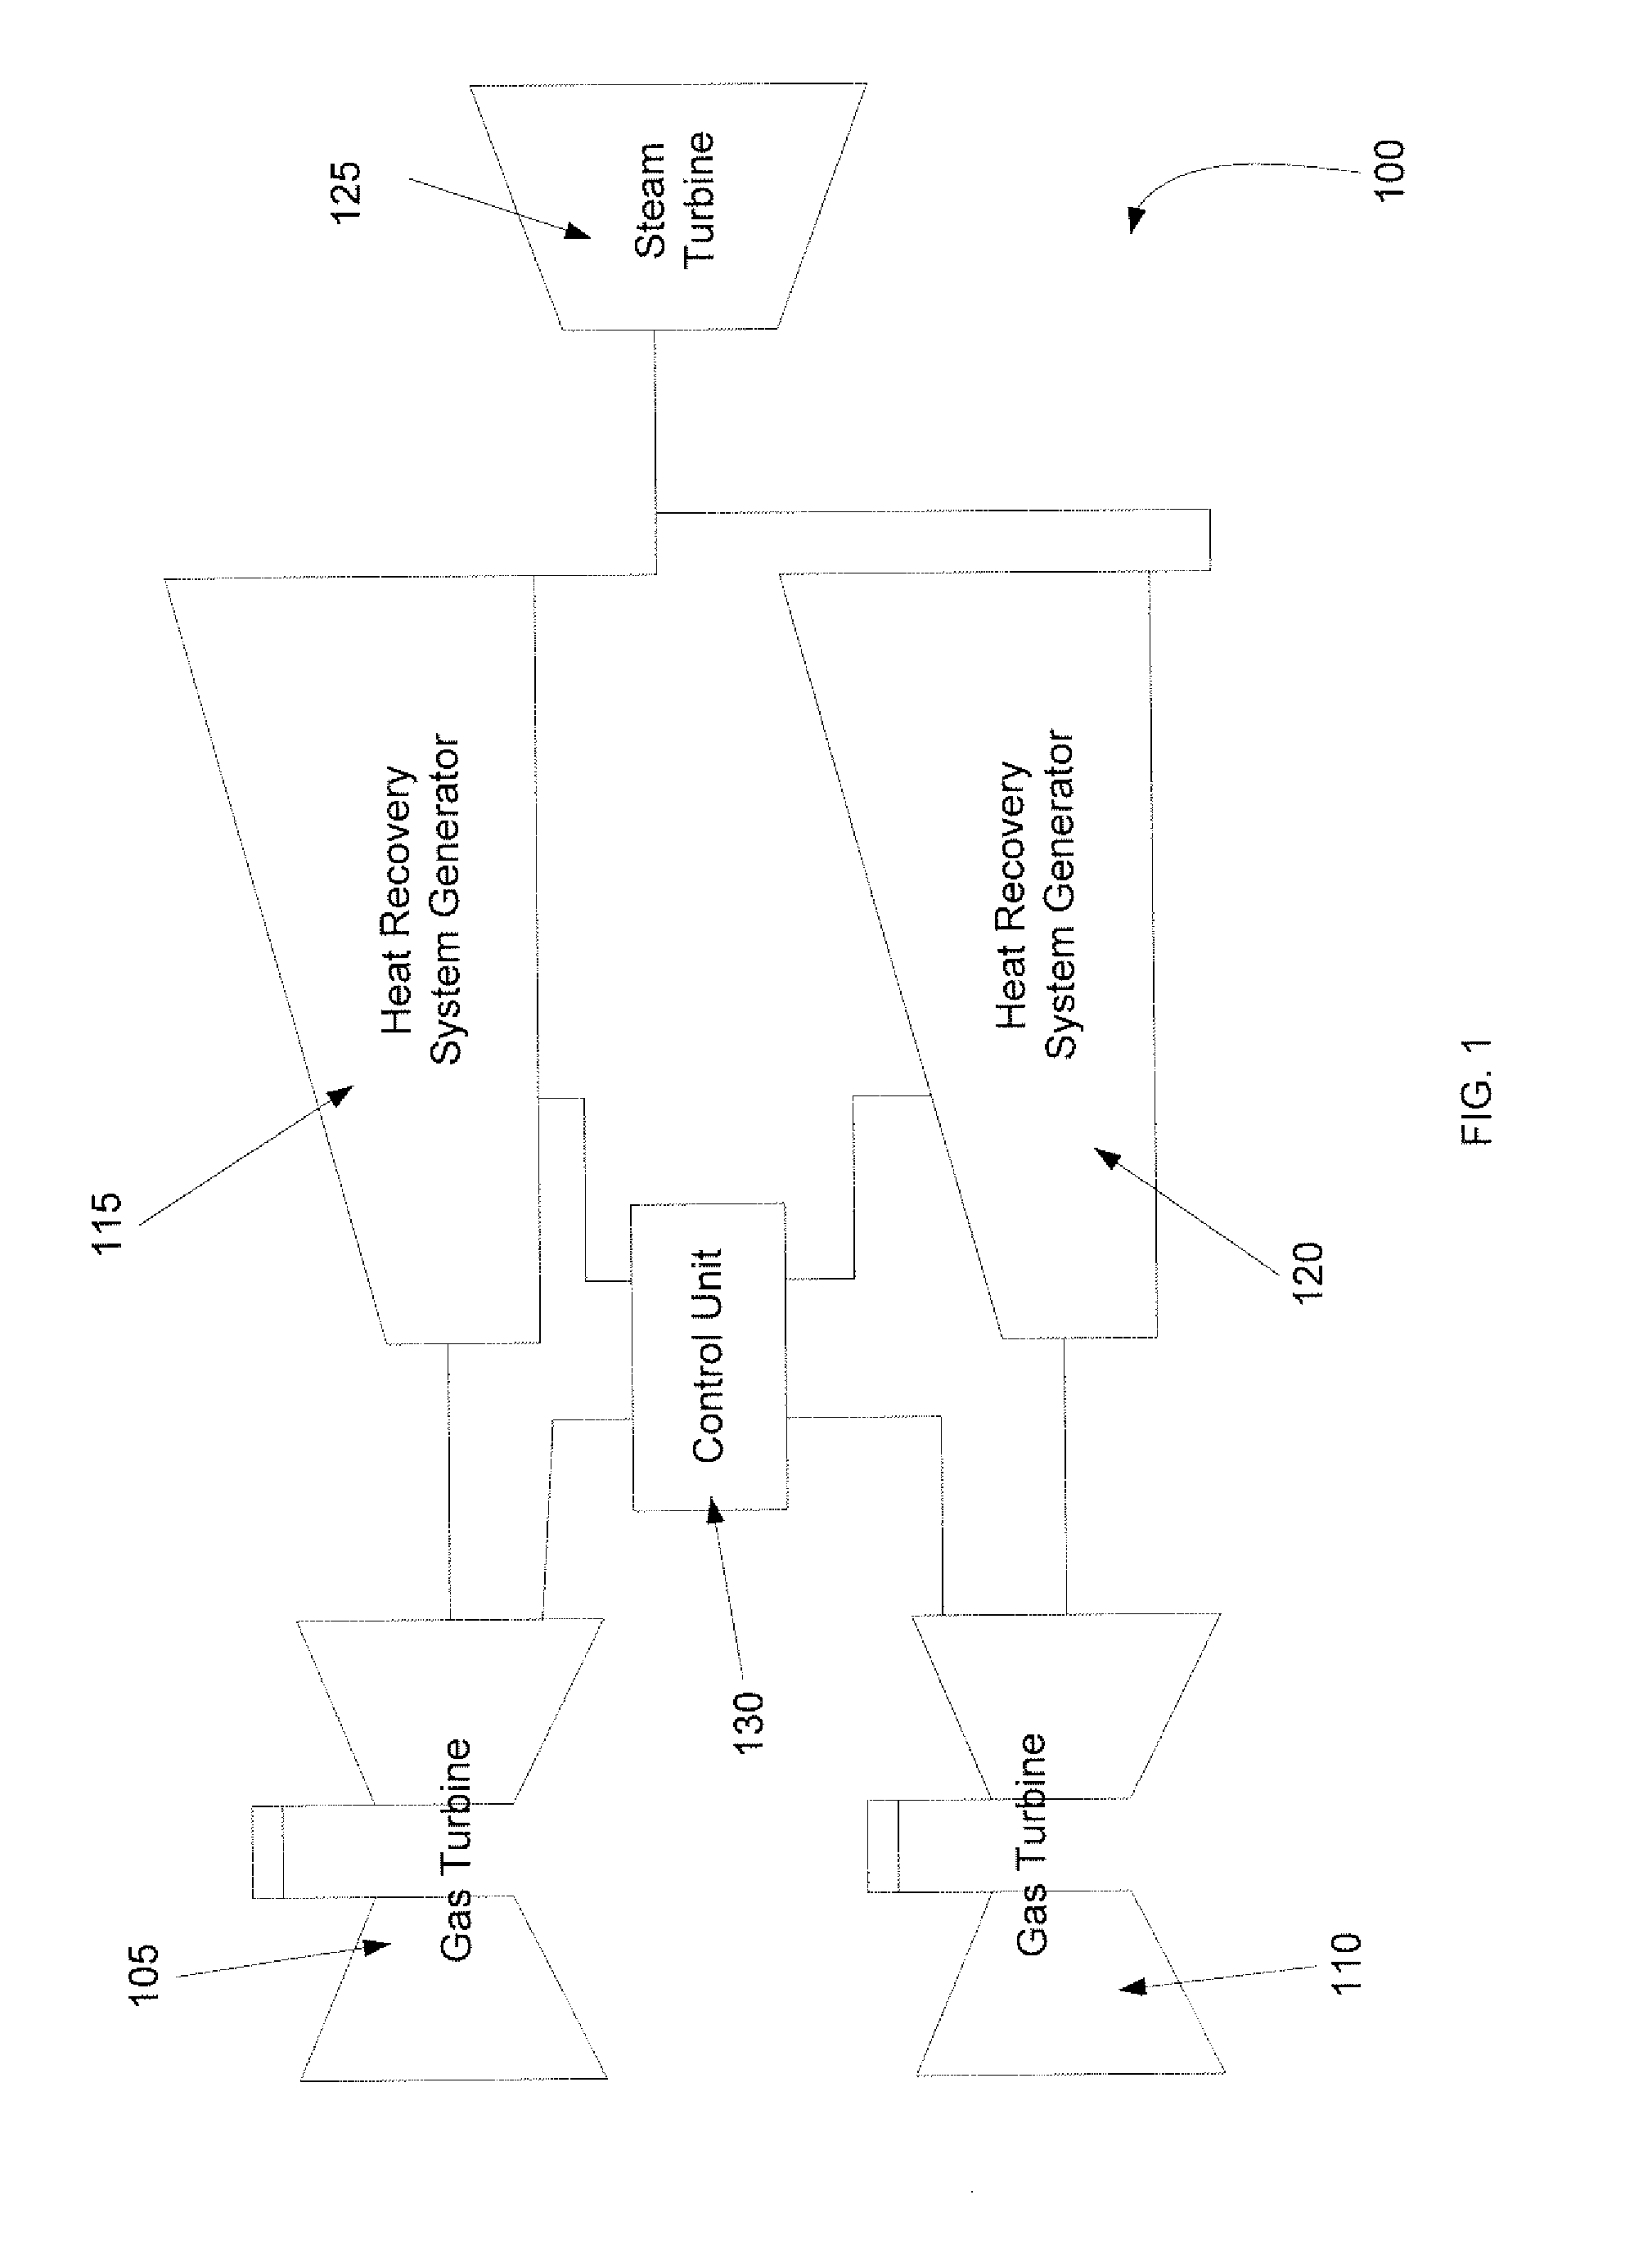 Methods and systems for estimating compressor fouling impact to combined cycle power plants